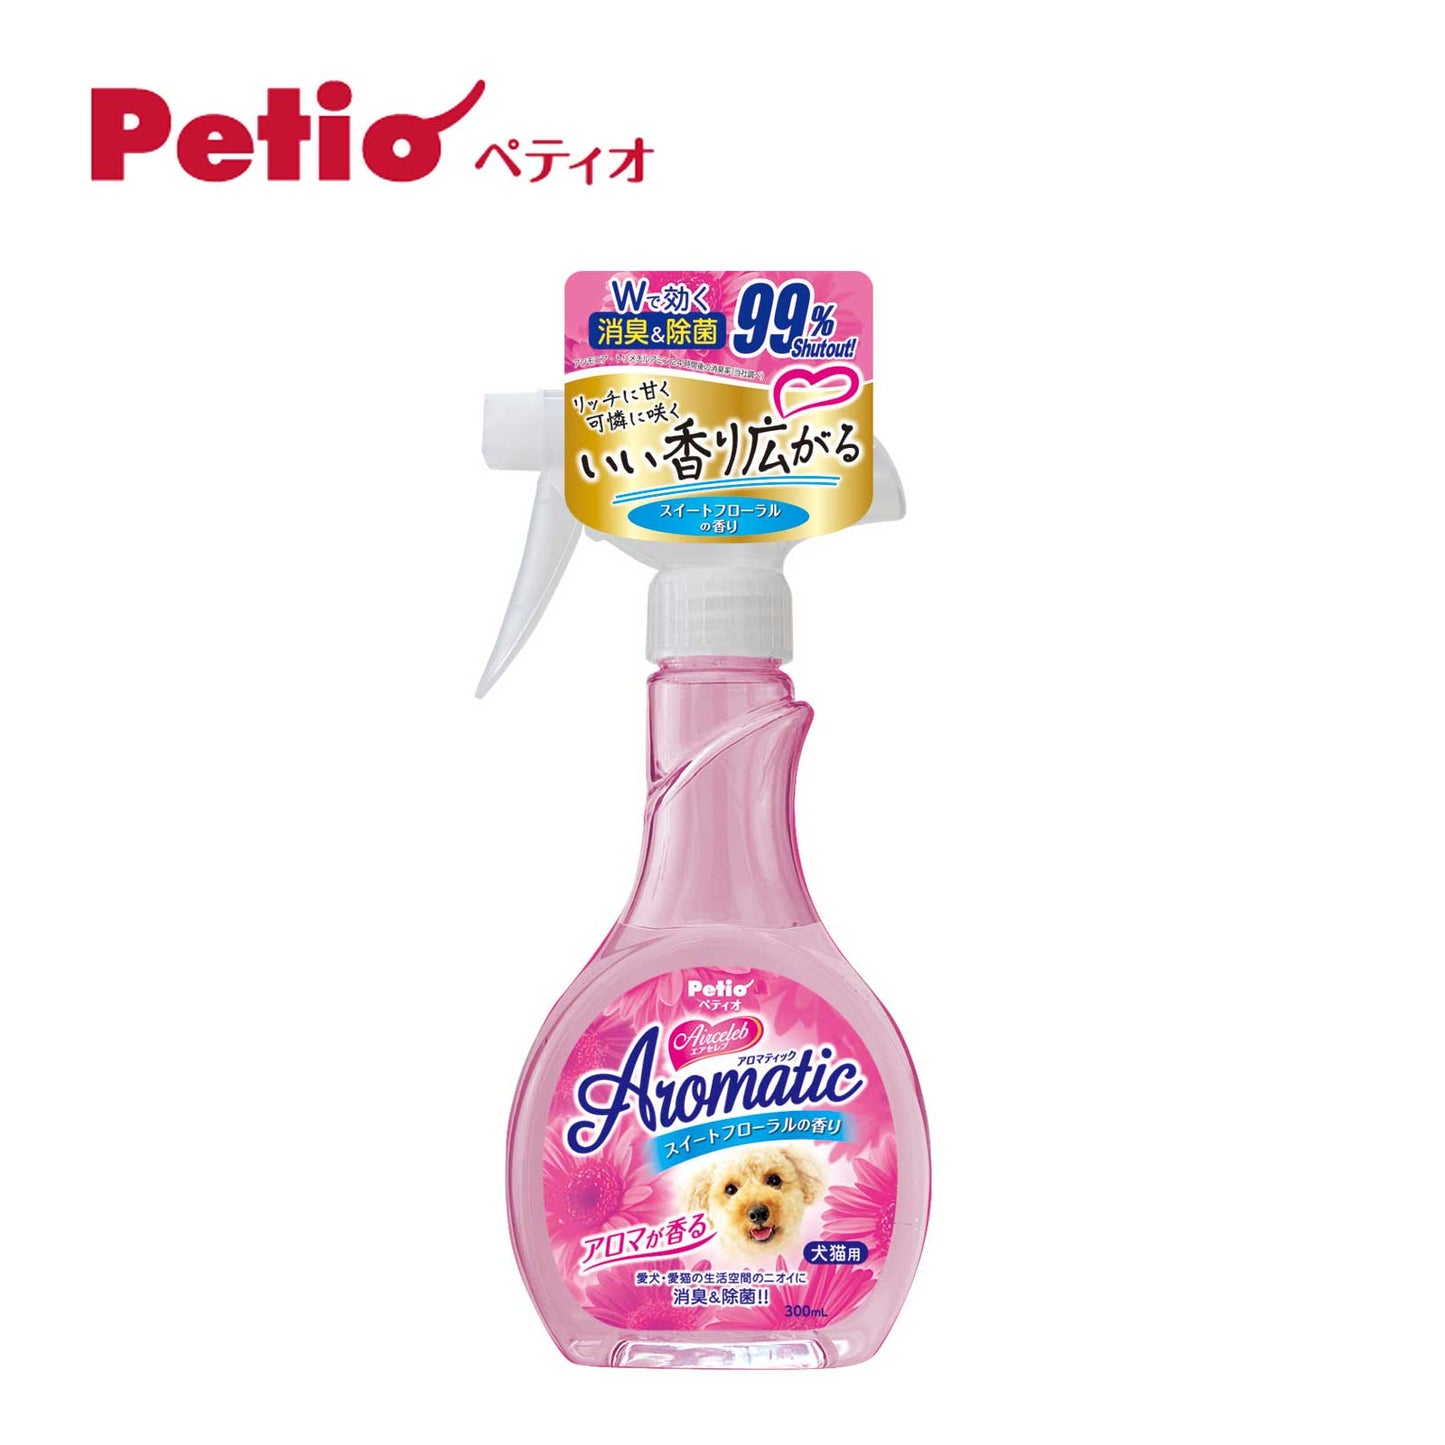 Petio Airceleb Aromatic Dedourant and Bacteria Eliminator Sweet Flower scent 300ml